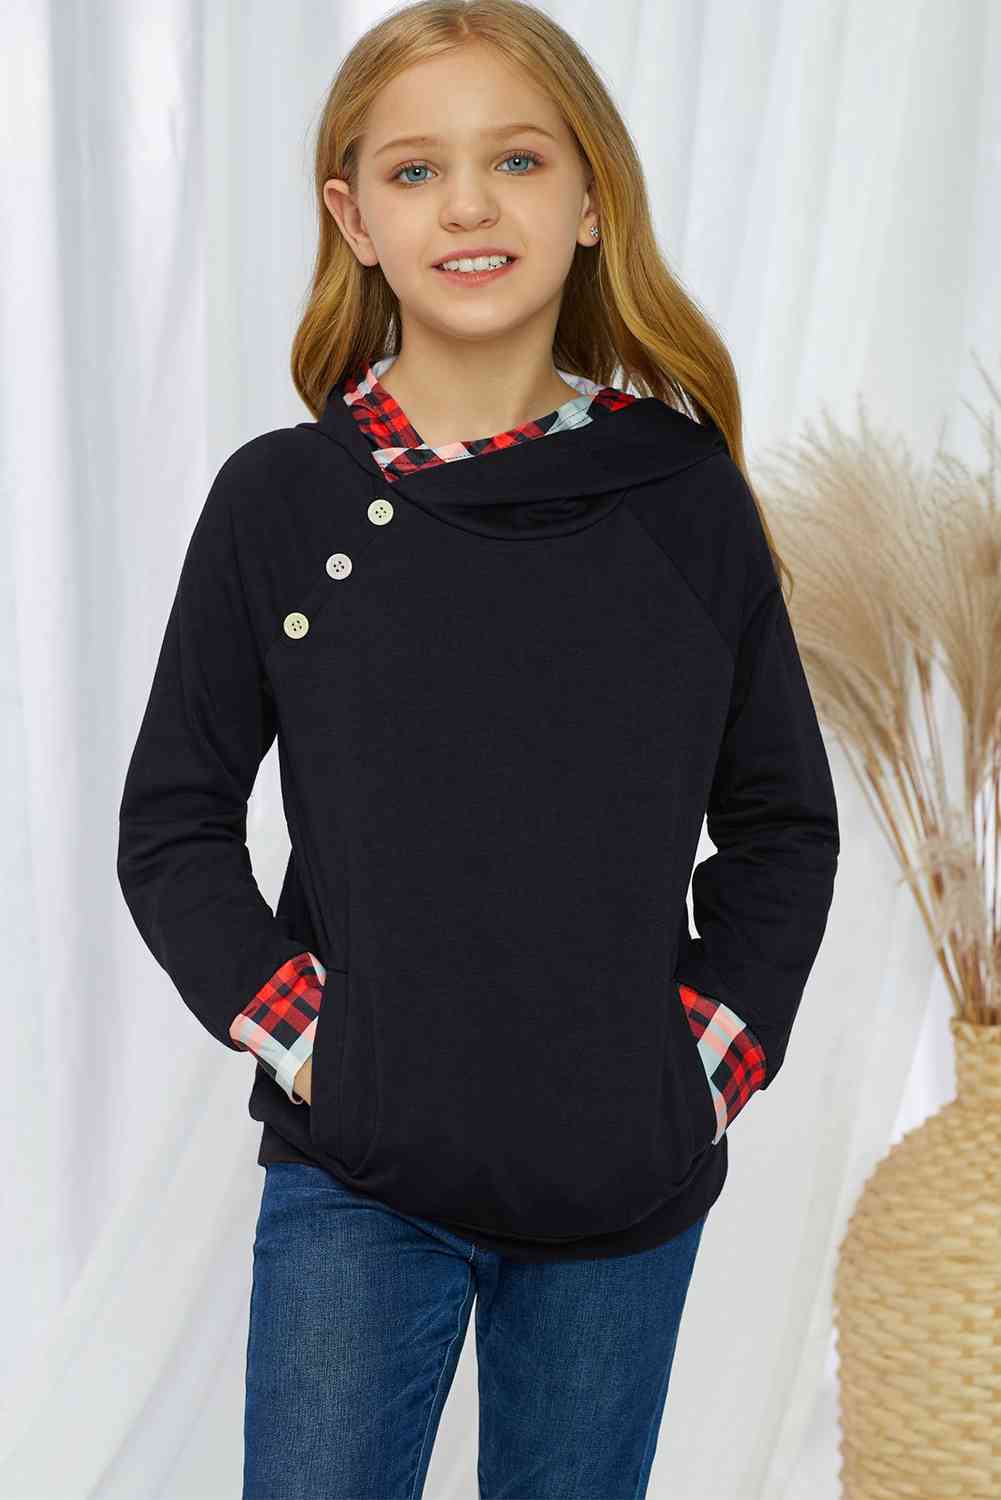 Girls Plaid Decorative Button Hoodie with Pockets, Ages 4-13